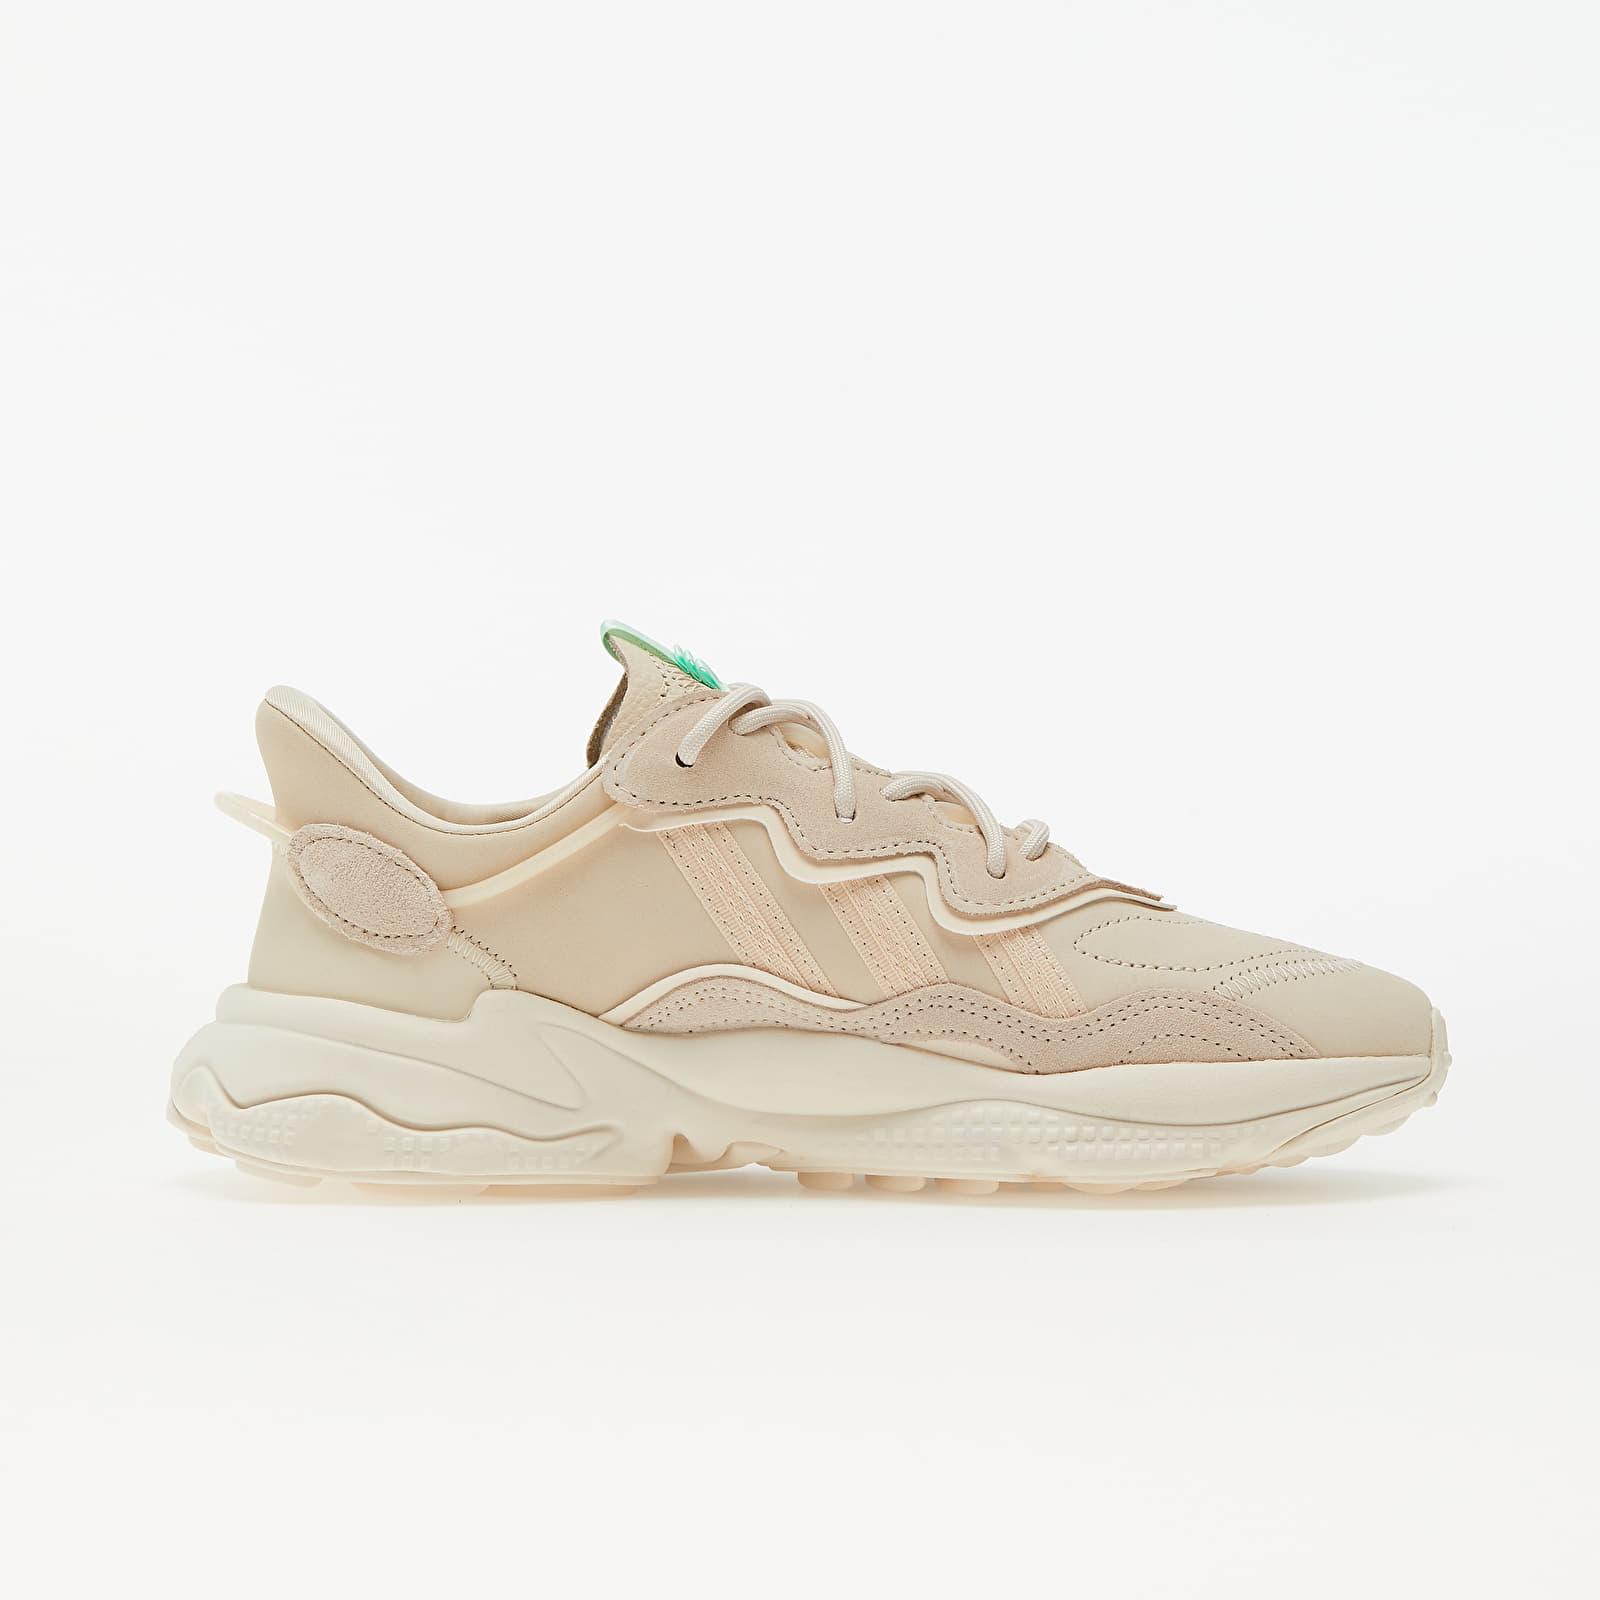 adidas Originals Adidas Ozweego W Halo Ivory/ Linen/ Core White in Brown |  Lyst